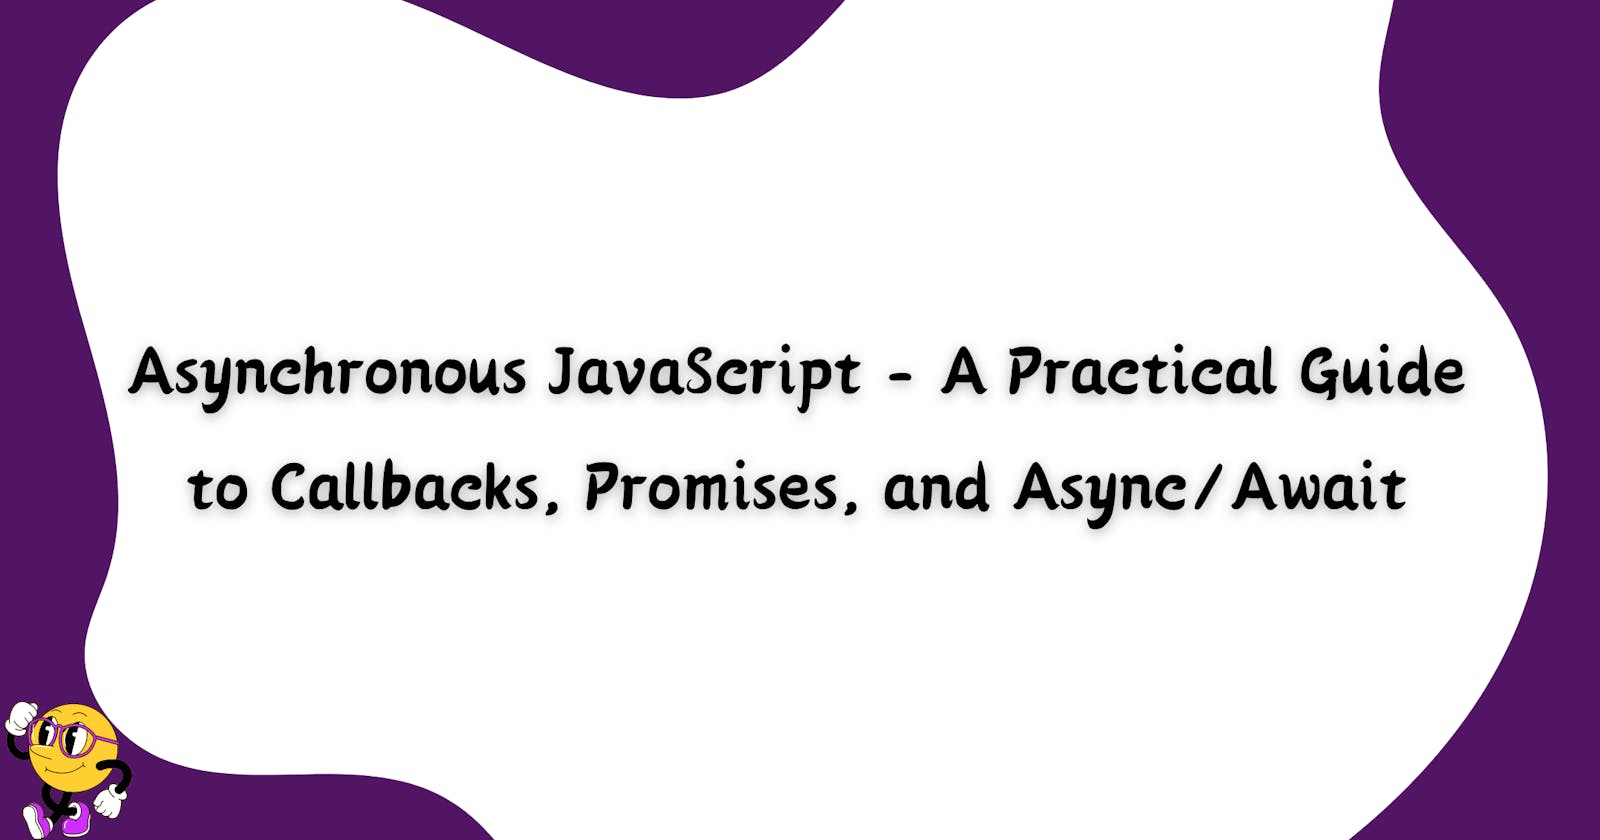 Asynchronous JavaScript - A Practical Guide to Callbacks, Promises, and Async/Await